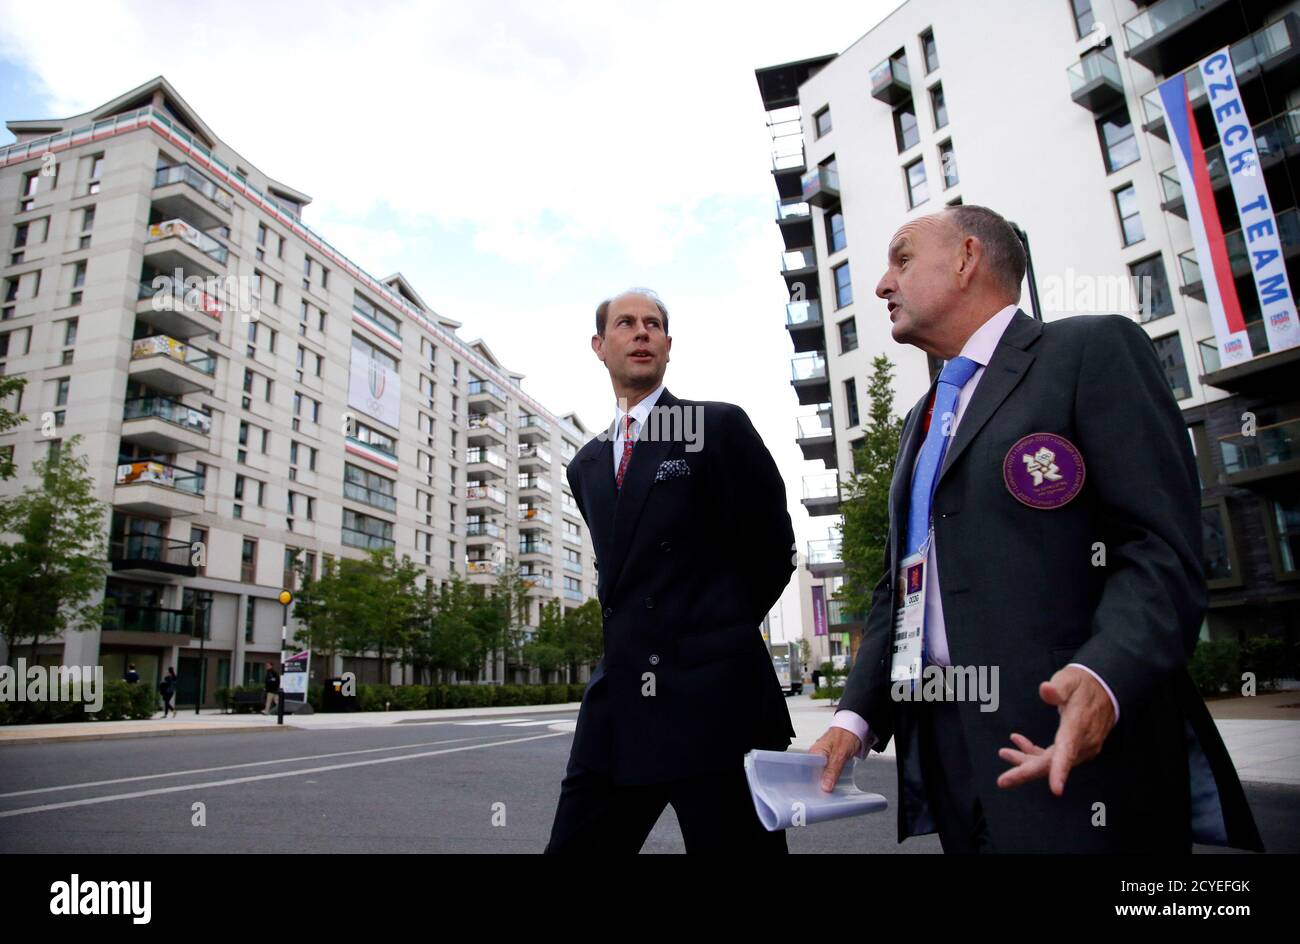 Britain's Prince Edward (L) chats with village mayor Charles Allen during a tour of the Athletes' Village at the Olympic Park in London,  July 19, 2012.    REUTERS/Jae C. Hong/Pool (BRITAIN - Tags: SPORT OLYMPICS ROYALS) Stock Photo